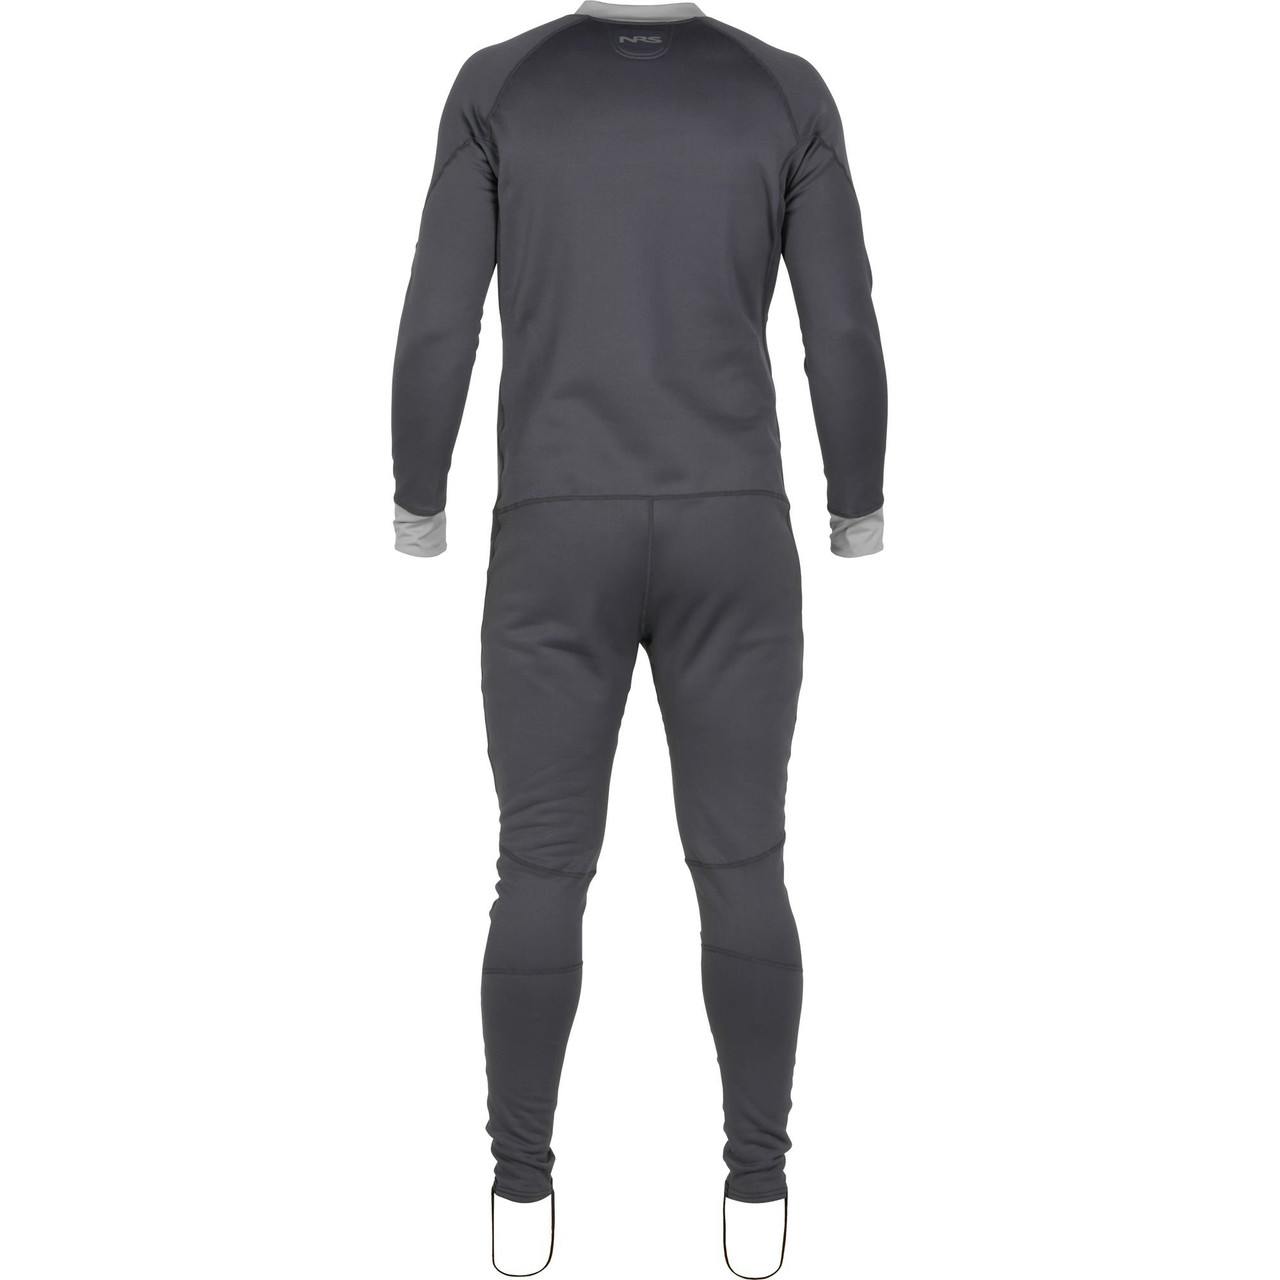 Expedition Weight Union Suit Dark Shadow